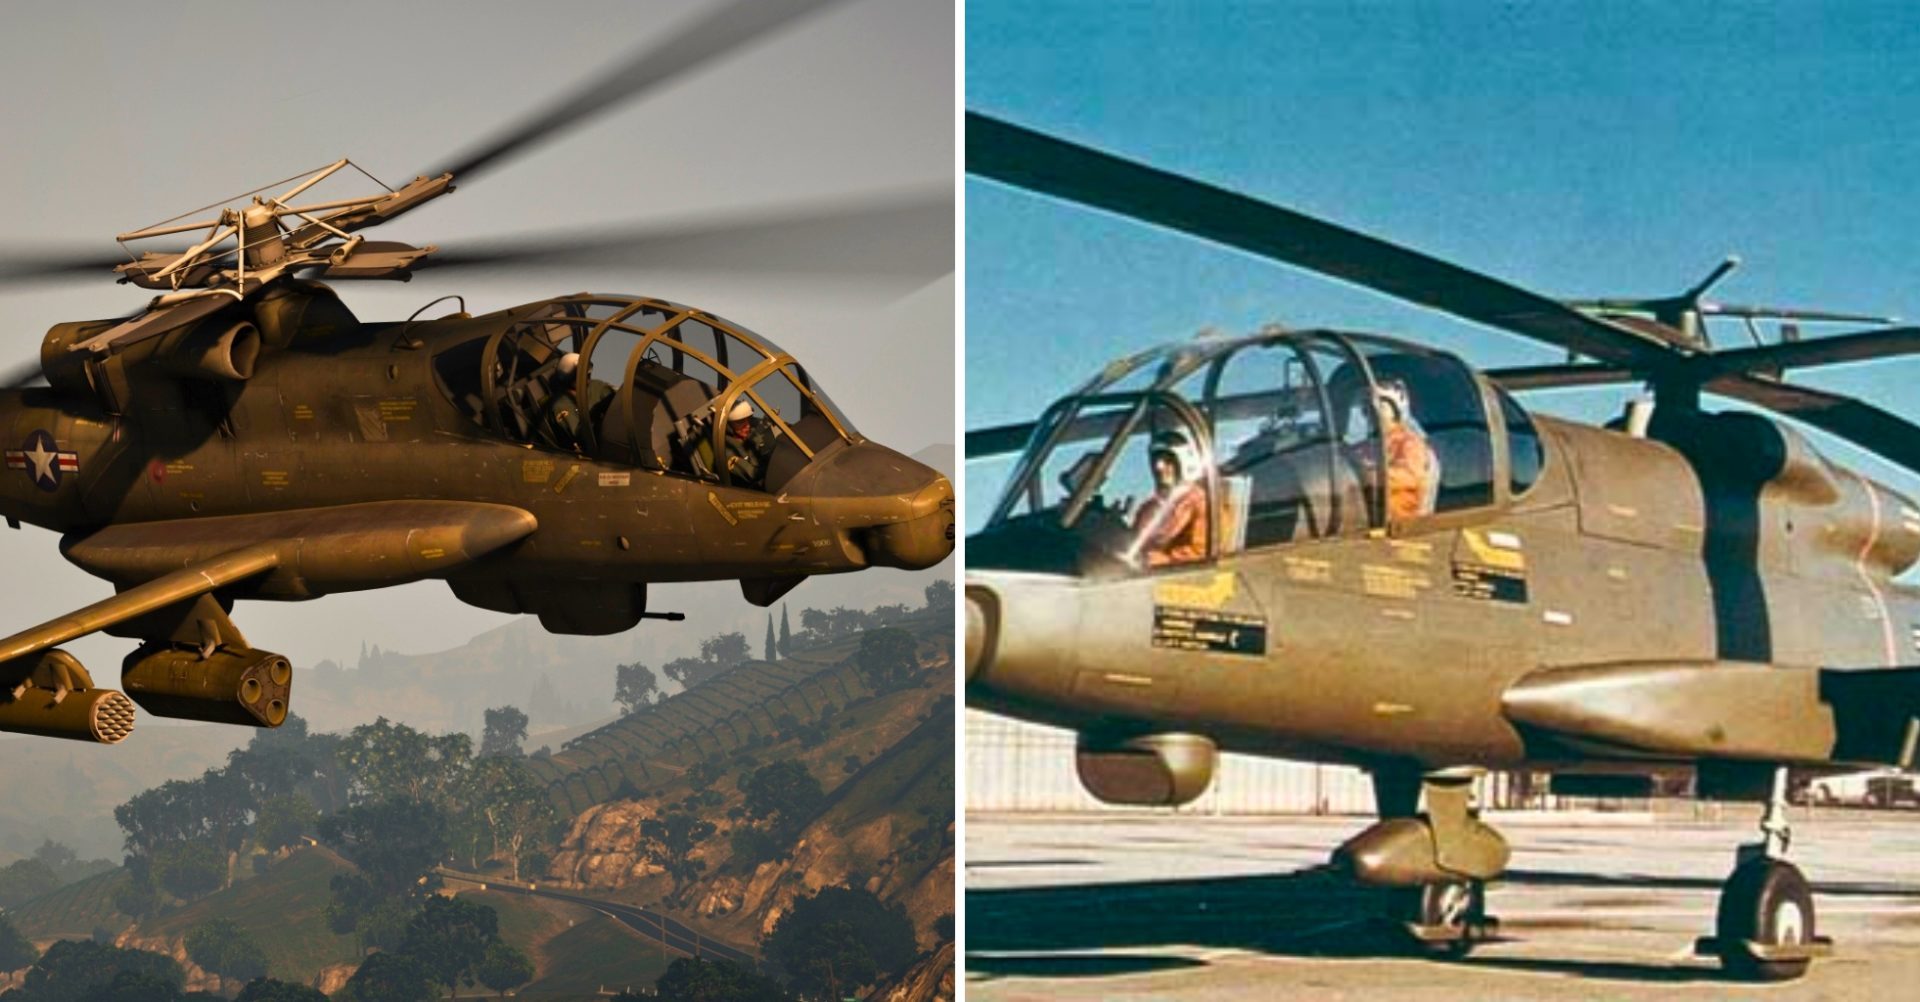 Remembering the AH-56 Cheyenne: The Helicopter That Faced Obstacles Too Great to Overcome - Latest News